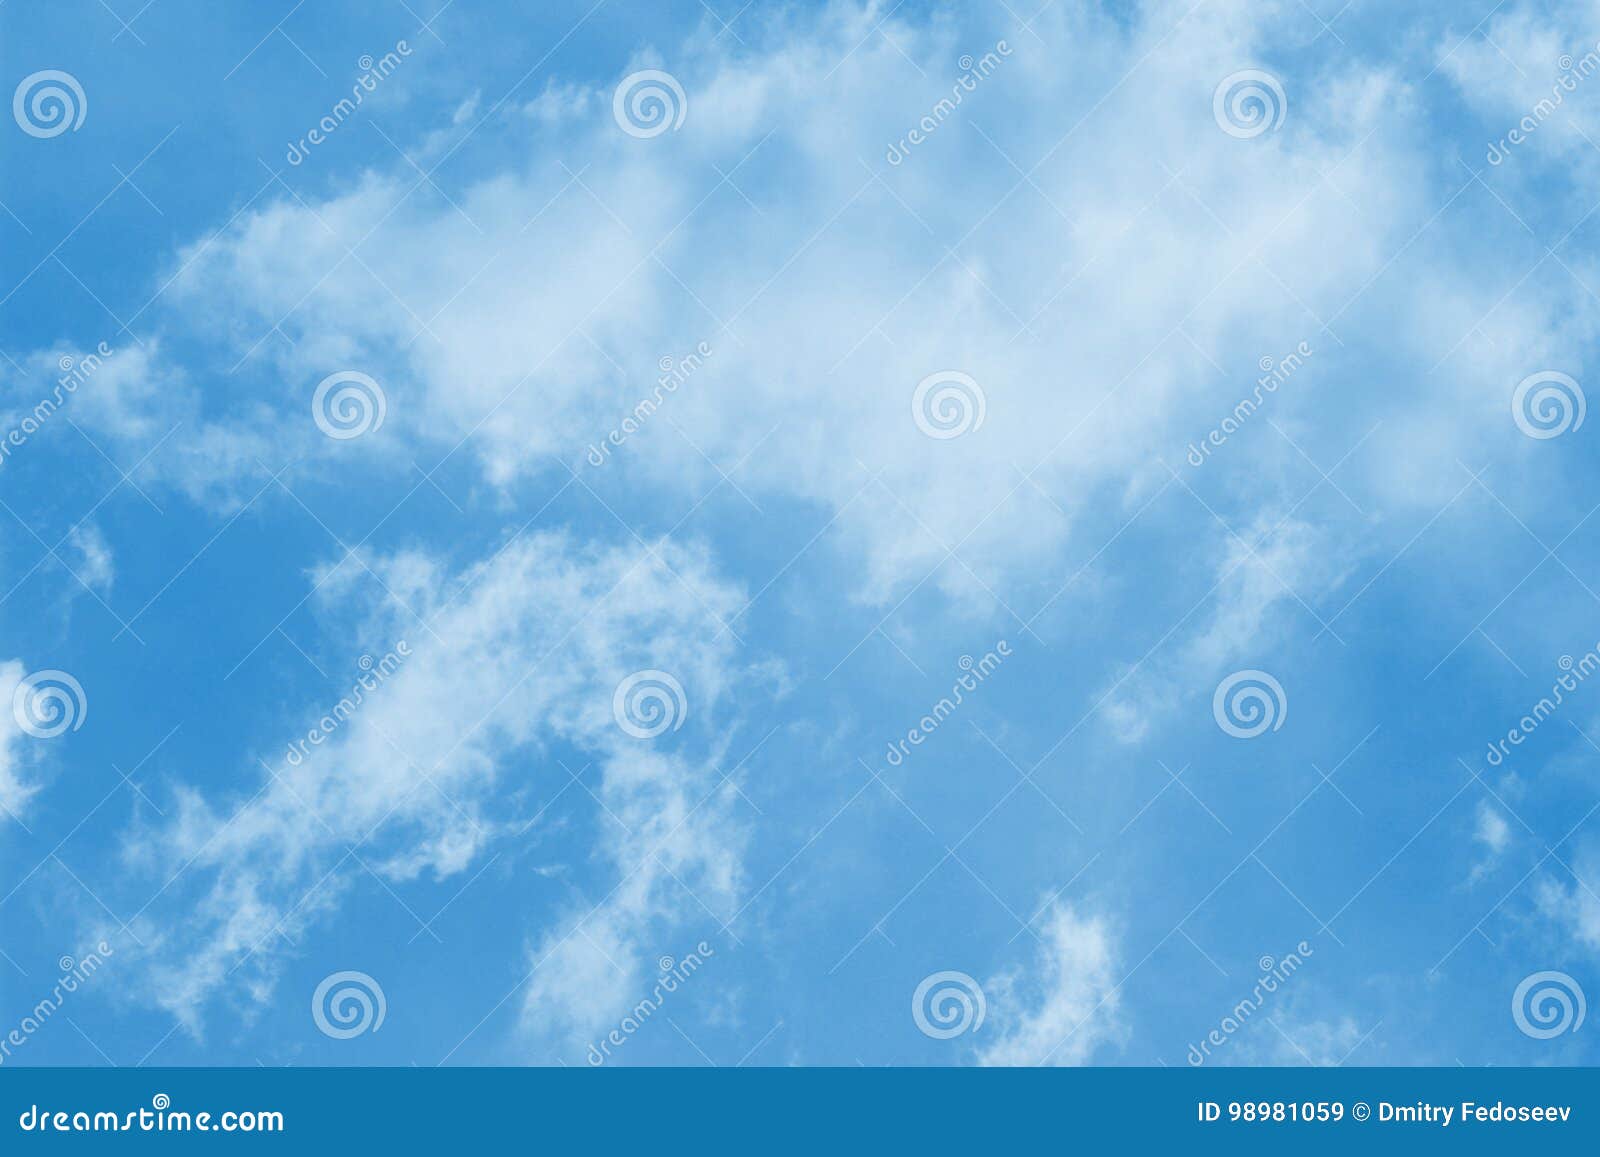 Blue sky with light clouds stock image. Image of summer - 98981059